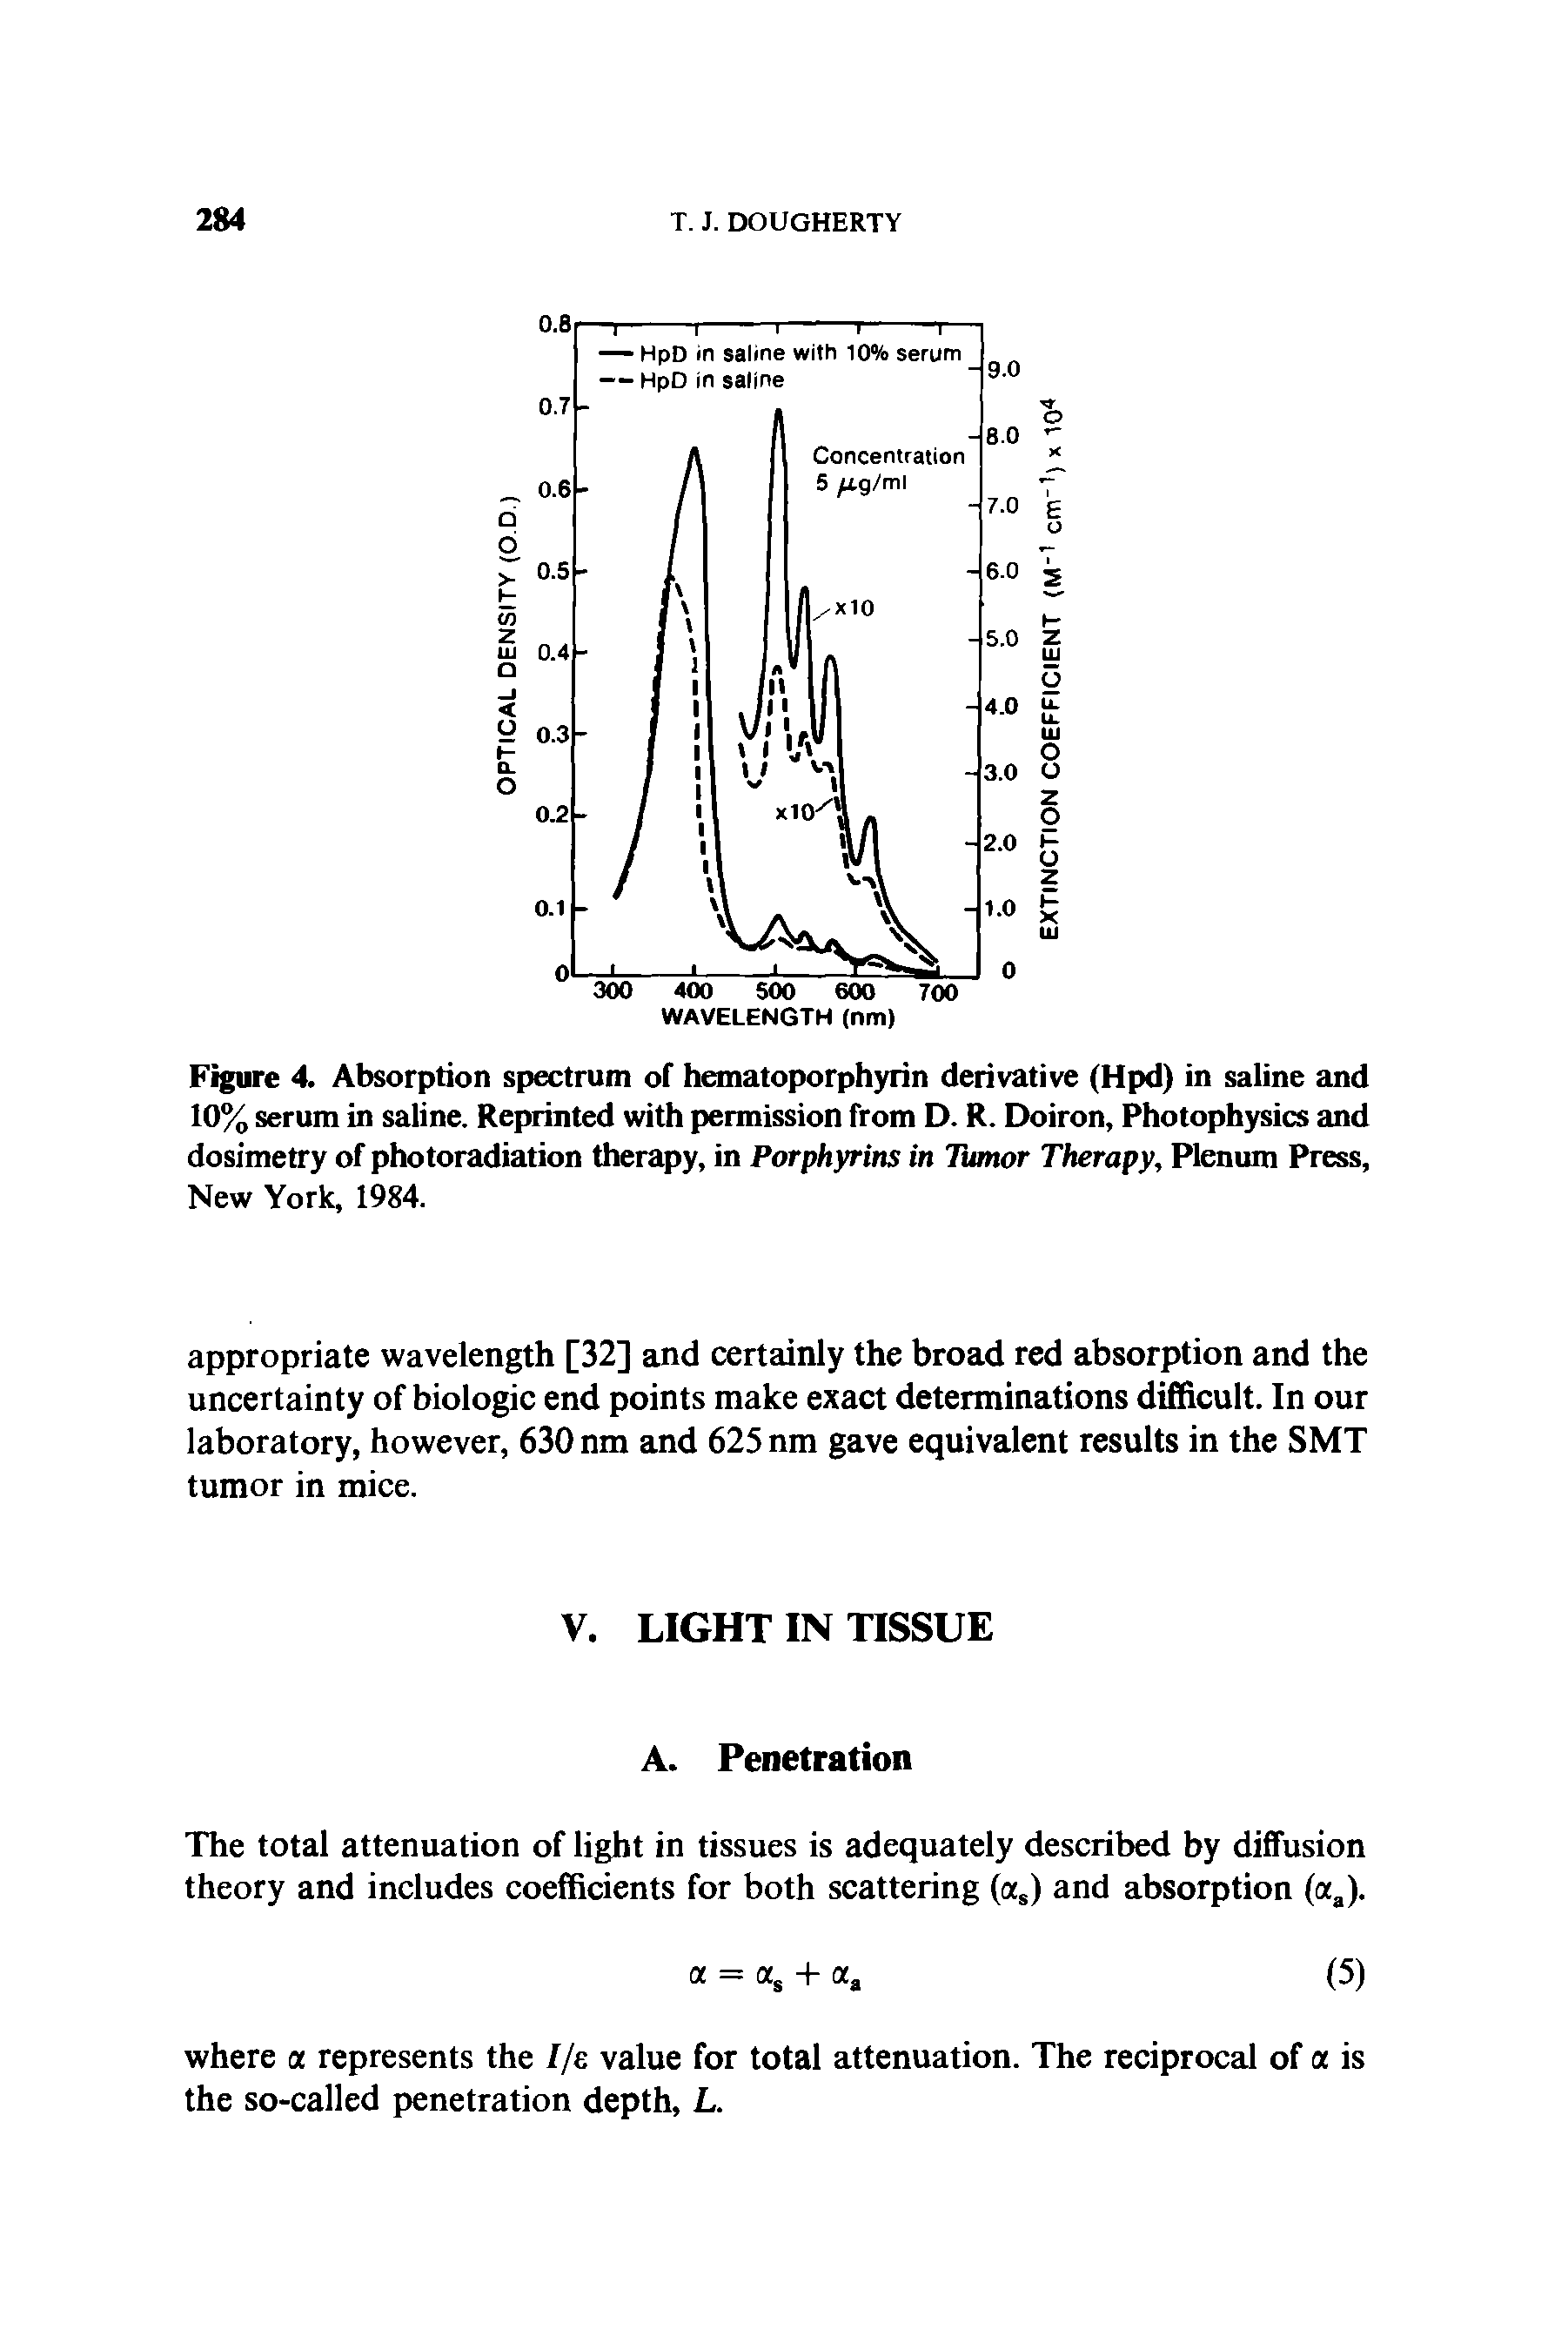 Figure 4. Absorption spectrum of hematoporphyrin derivative (Hpd) in saline and 10% serum in saline. Reprinted with permission from D. R. Doiron, Photophysics and dosimetry of photoradiation therapy, in Porphyrins in Tumor Therapy, Plenum Press, New York, 1984.